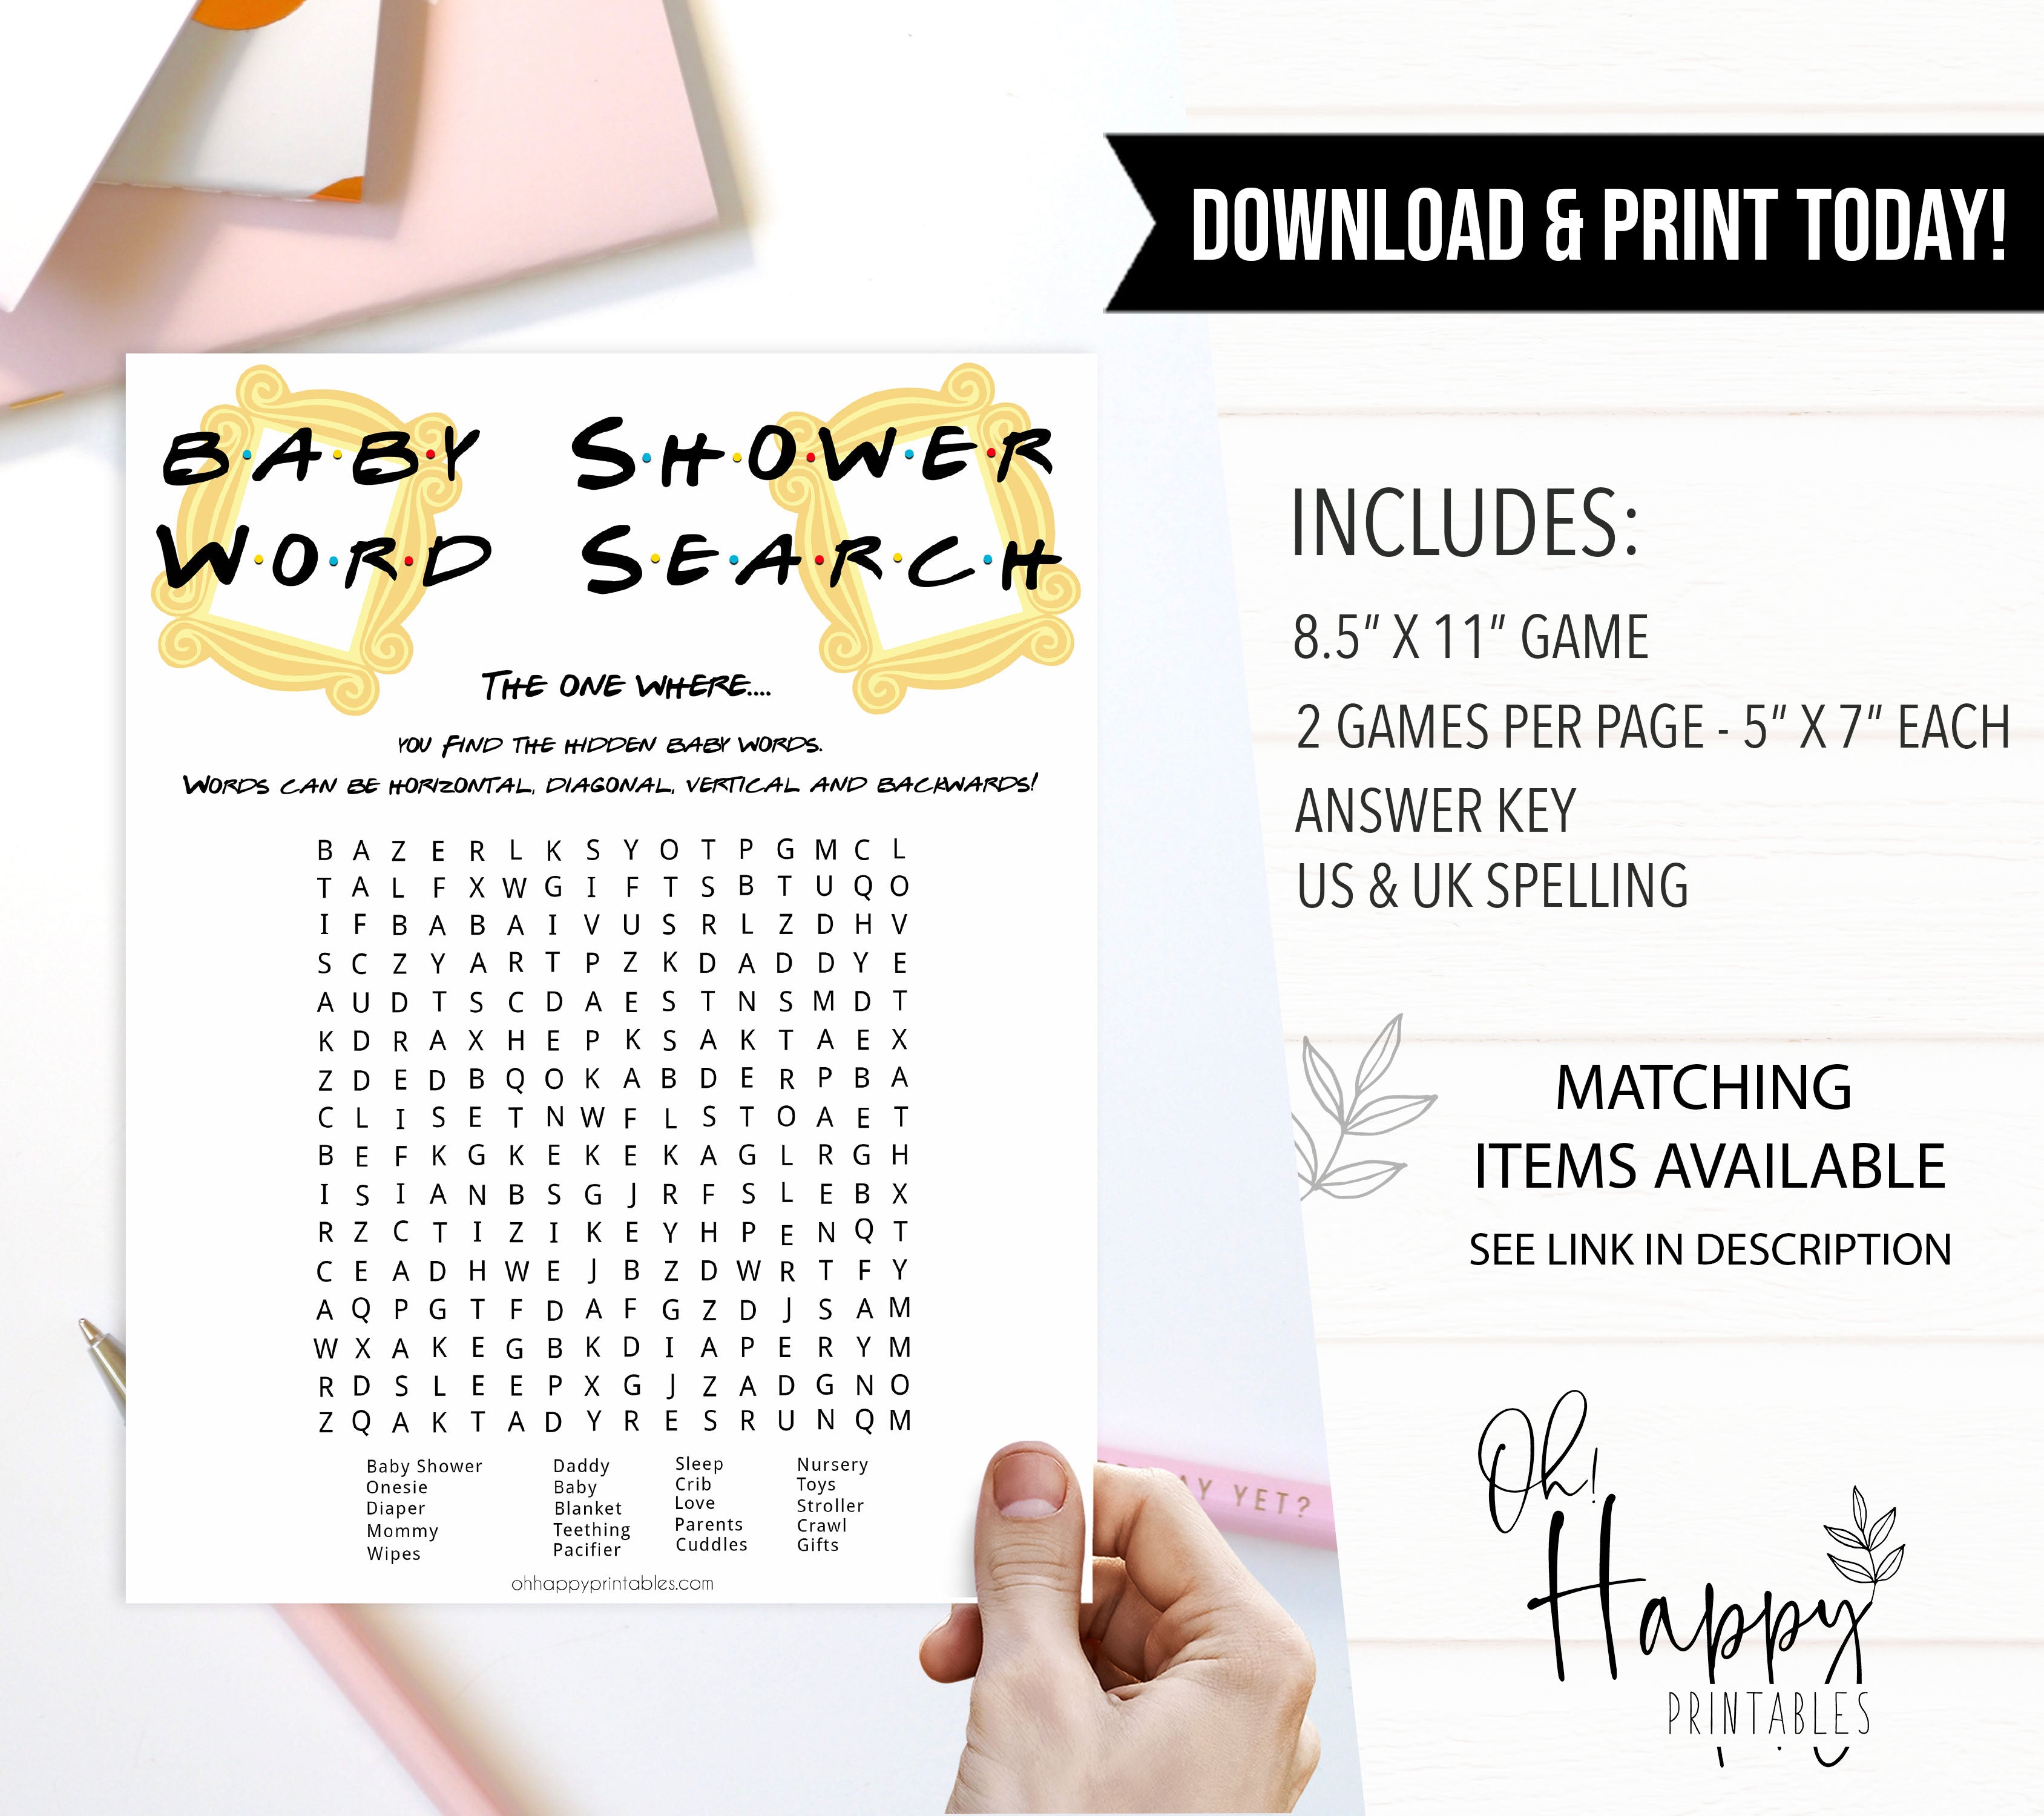 baby shower word search game, baby word search, Printable baby shower games, friends fun baby games, baby shower games, fun baby shower ideas, top baby shower ideas, friends baby shower, friends baby shower ideas